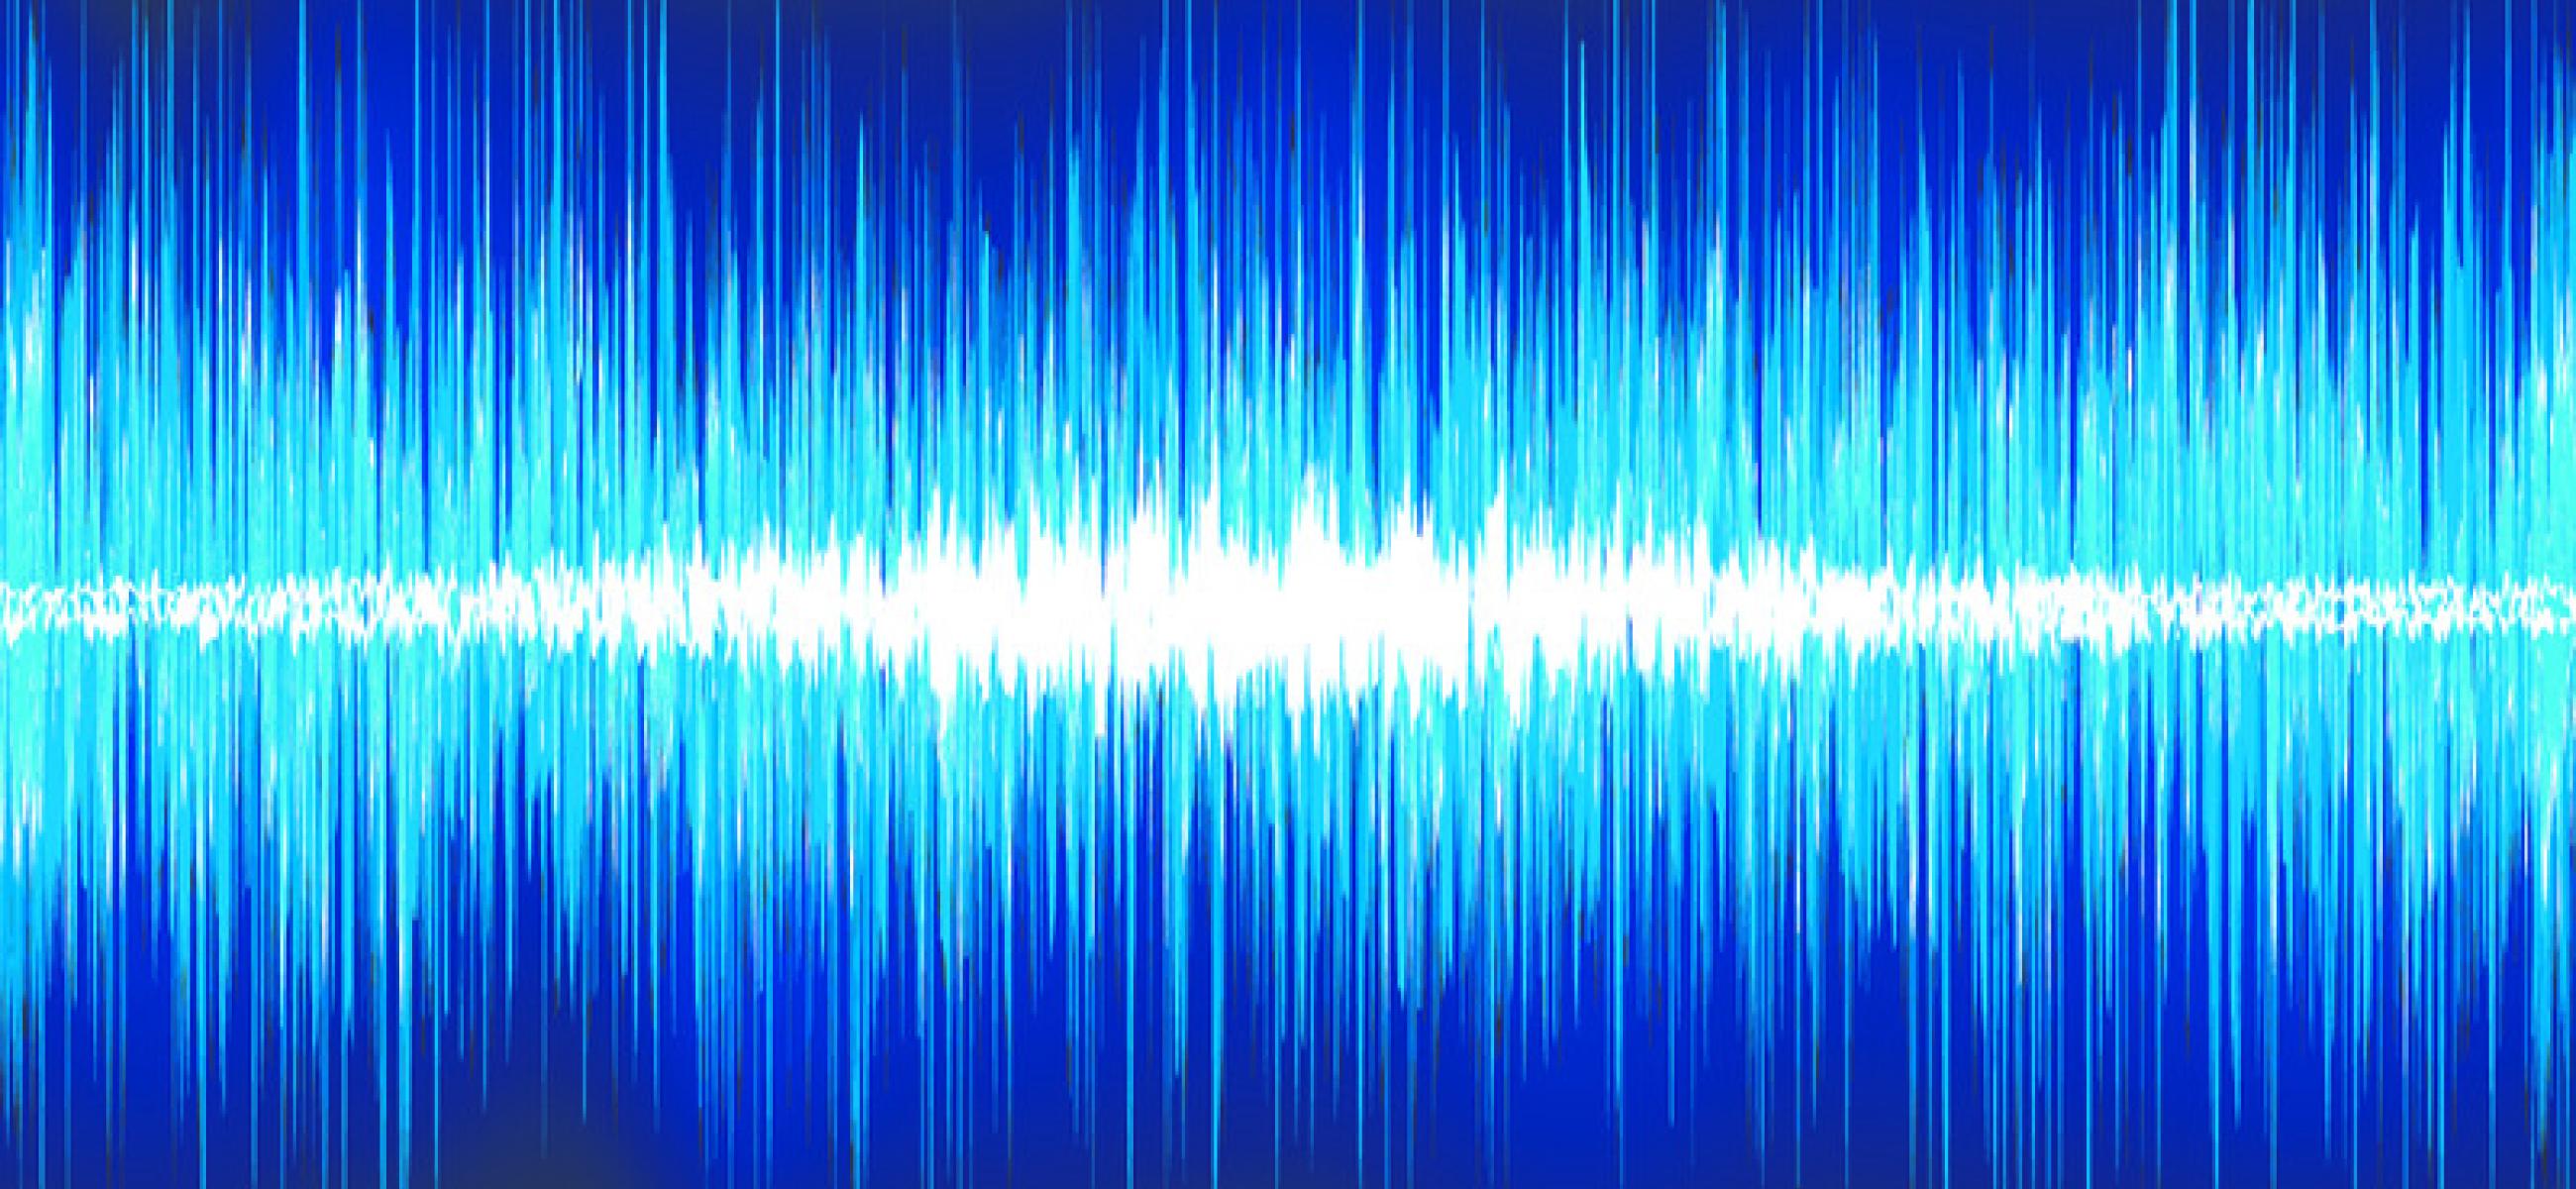 A sound wave radiates in blue across a dark background